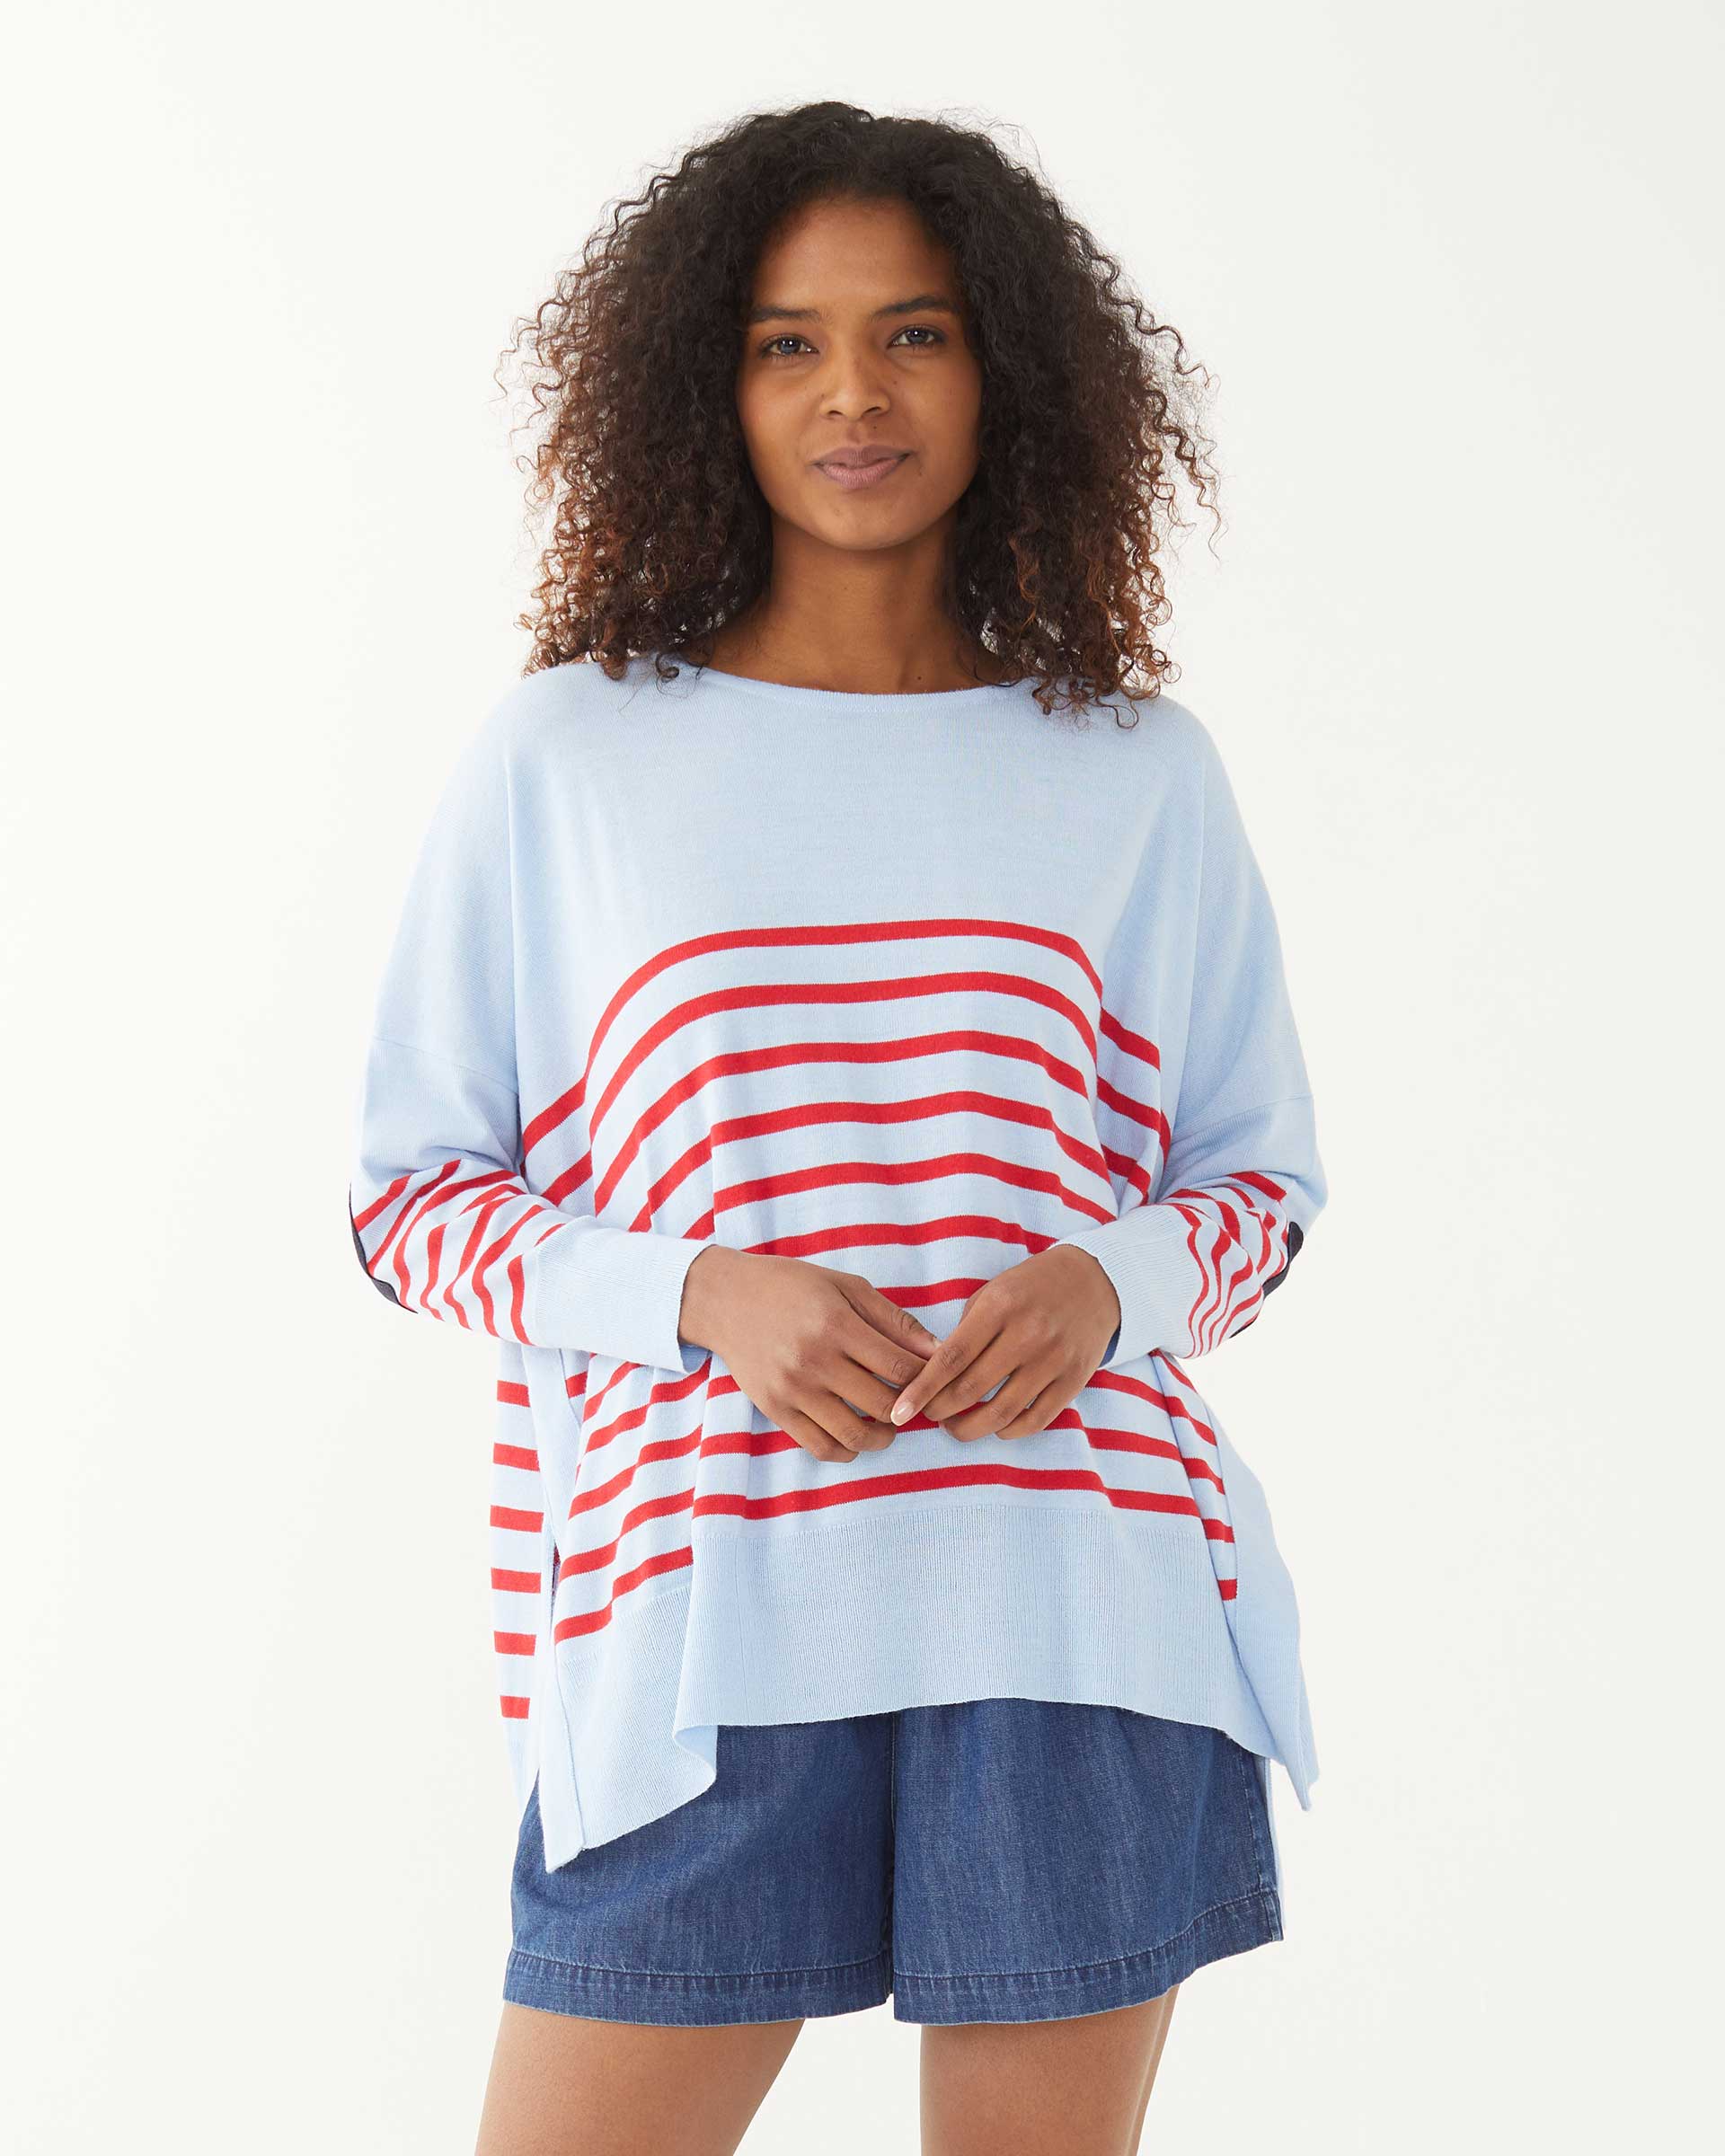 female wearing blue and red striped sweater with a navy heart elbow patch on a white background